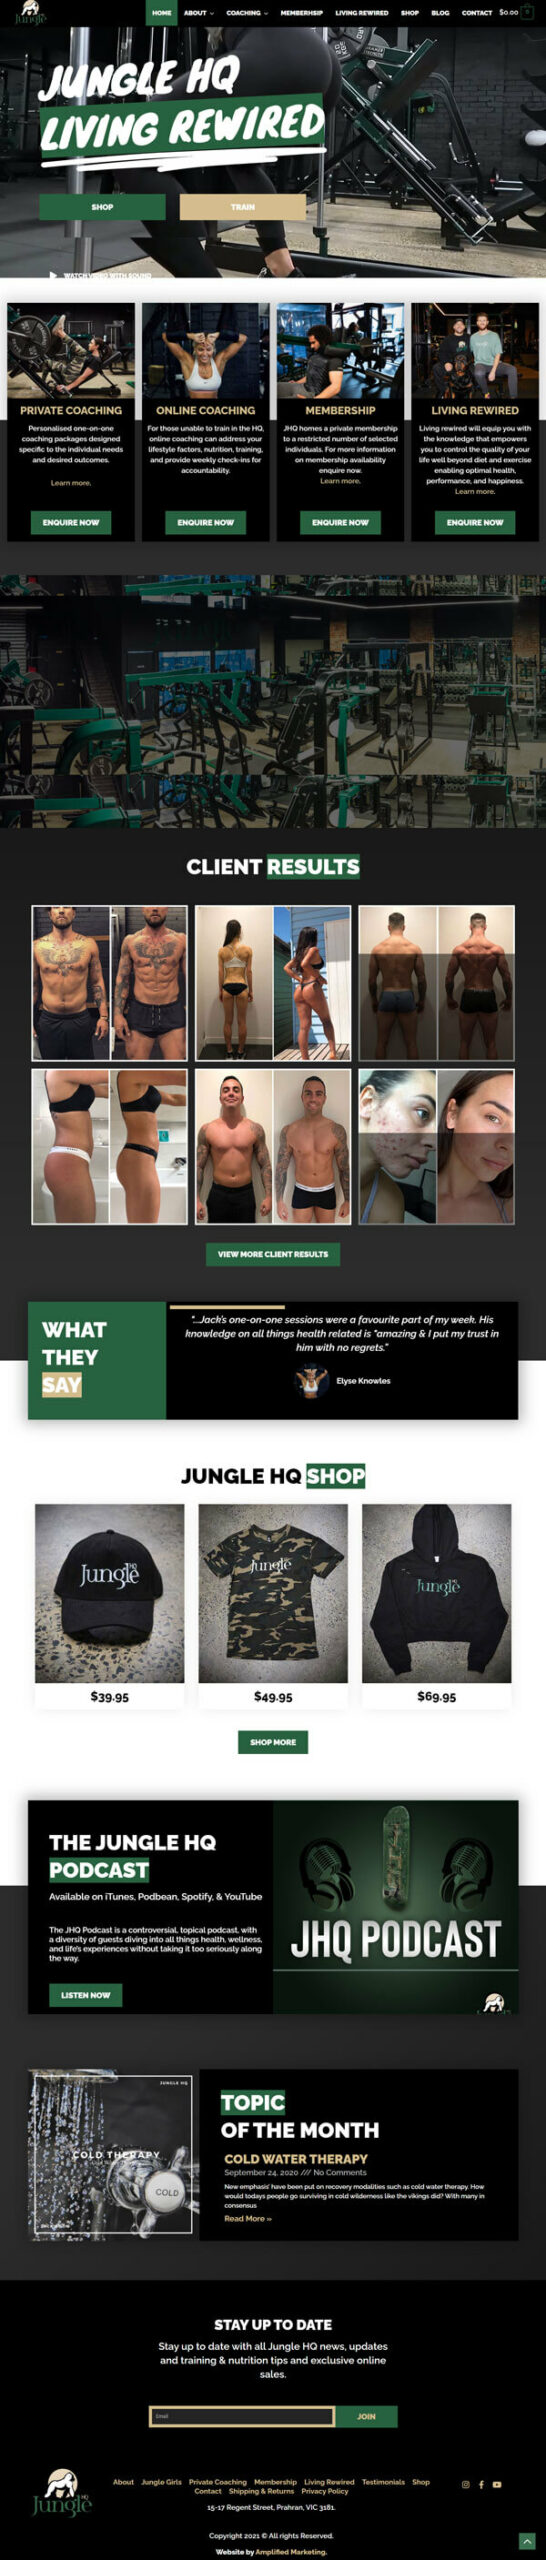 Jungle HQ full page screenshot - Case Study by Amplified Marketing